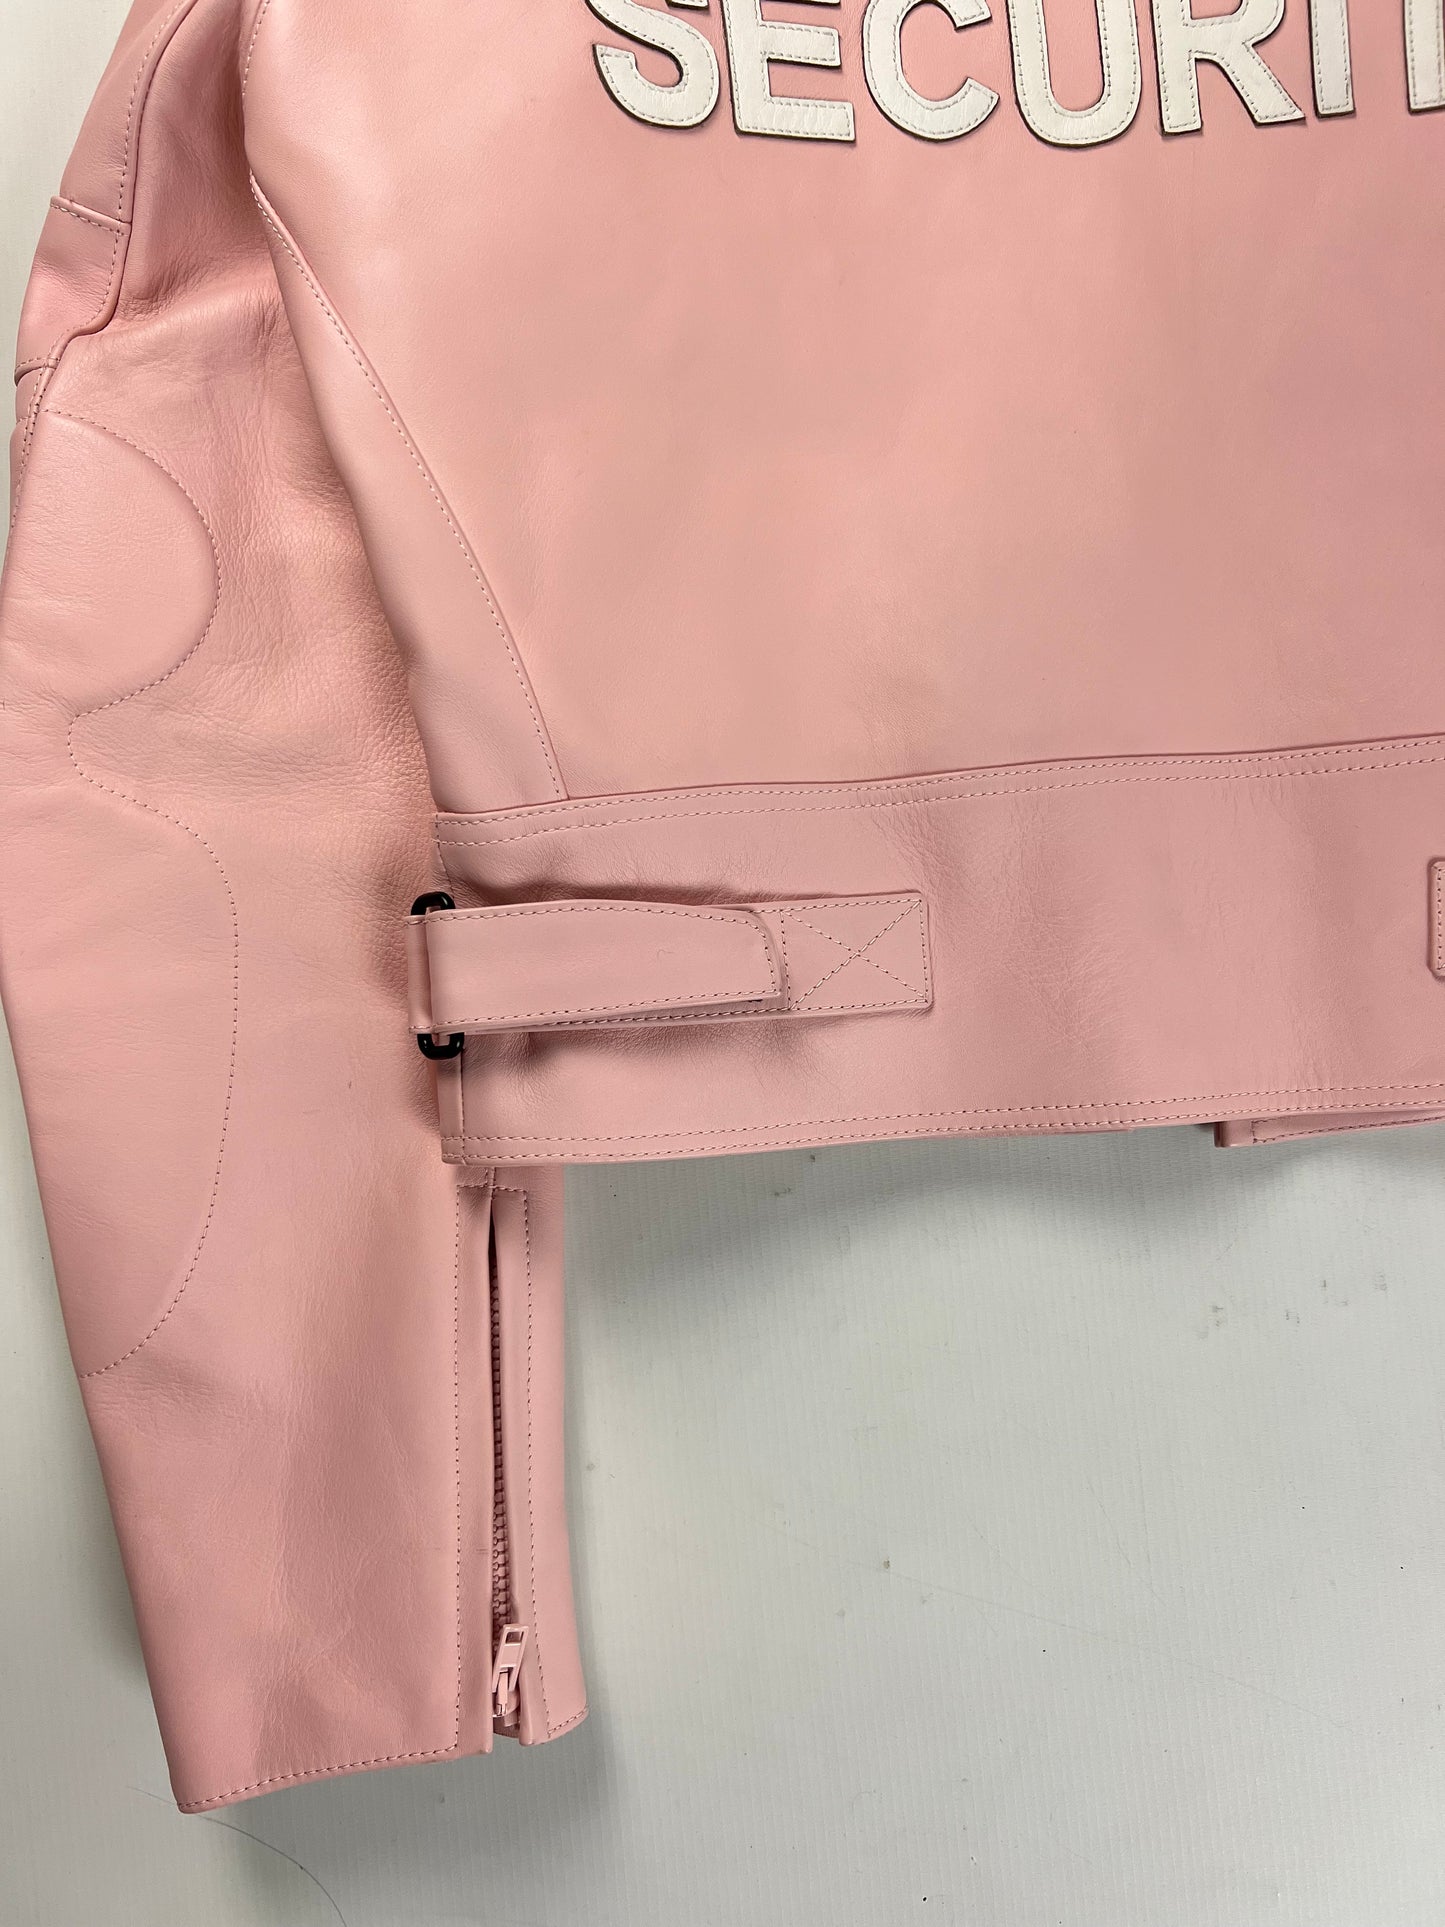 Vetements AW17 Securite PINK MOTO Leather Jacket SZ:XS